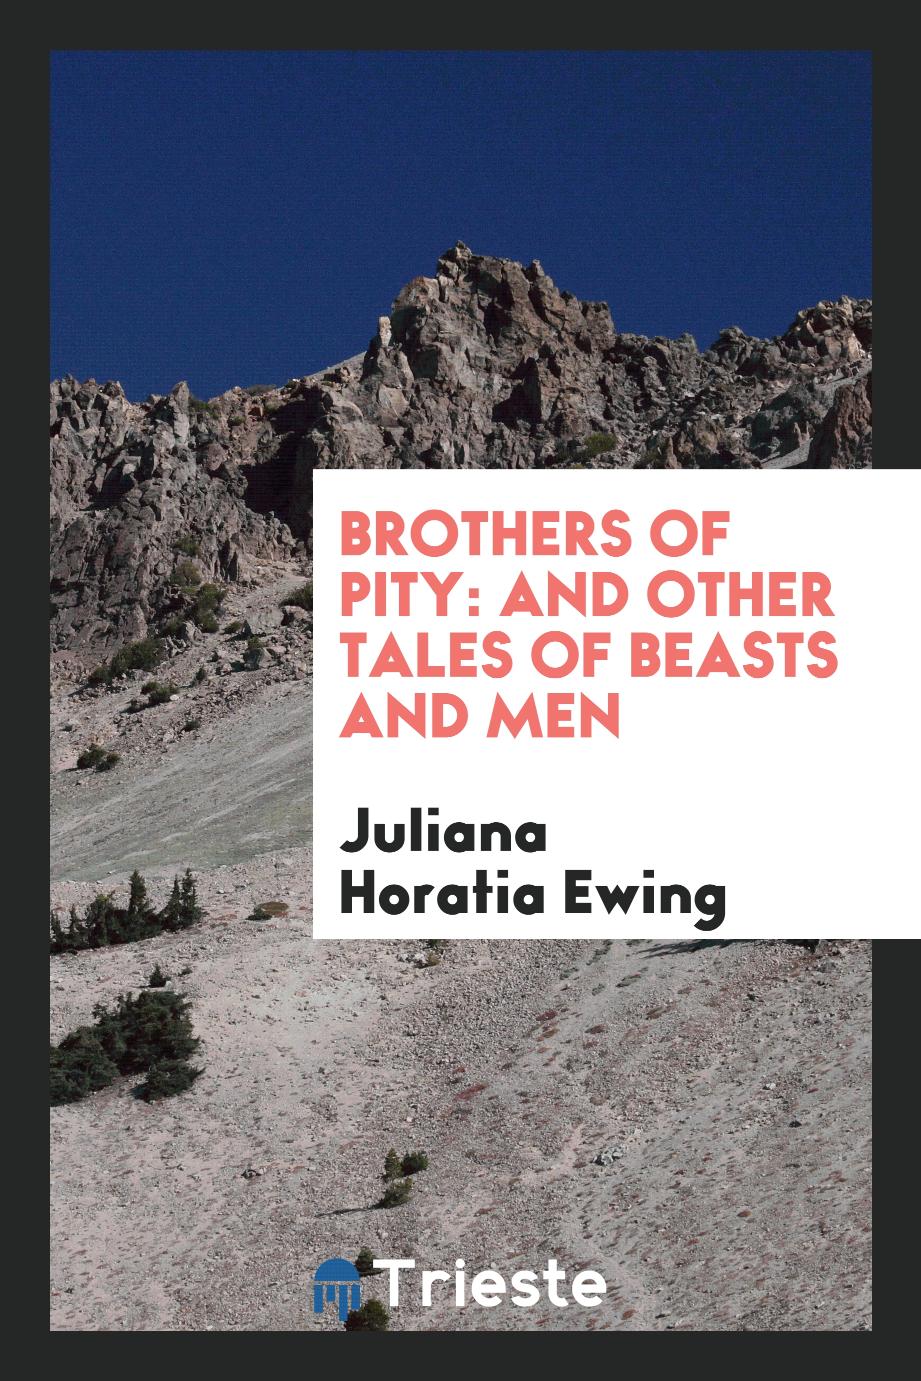 Brothers of Pity: and other tales of beasts and men